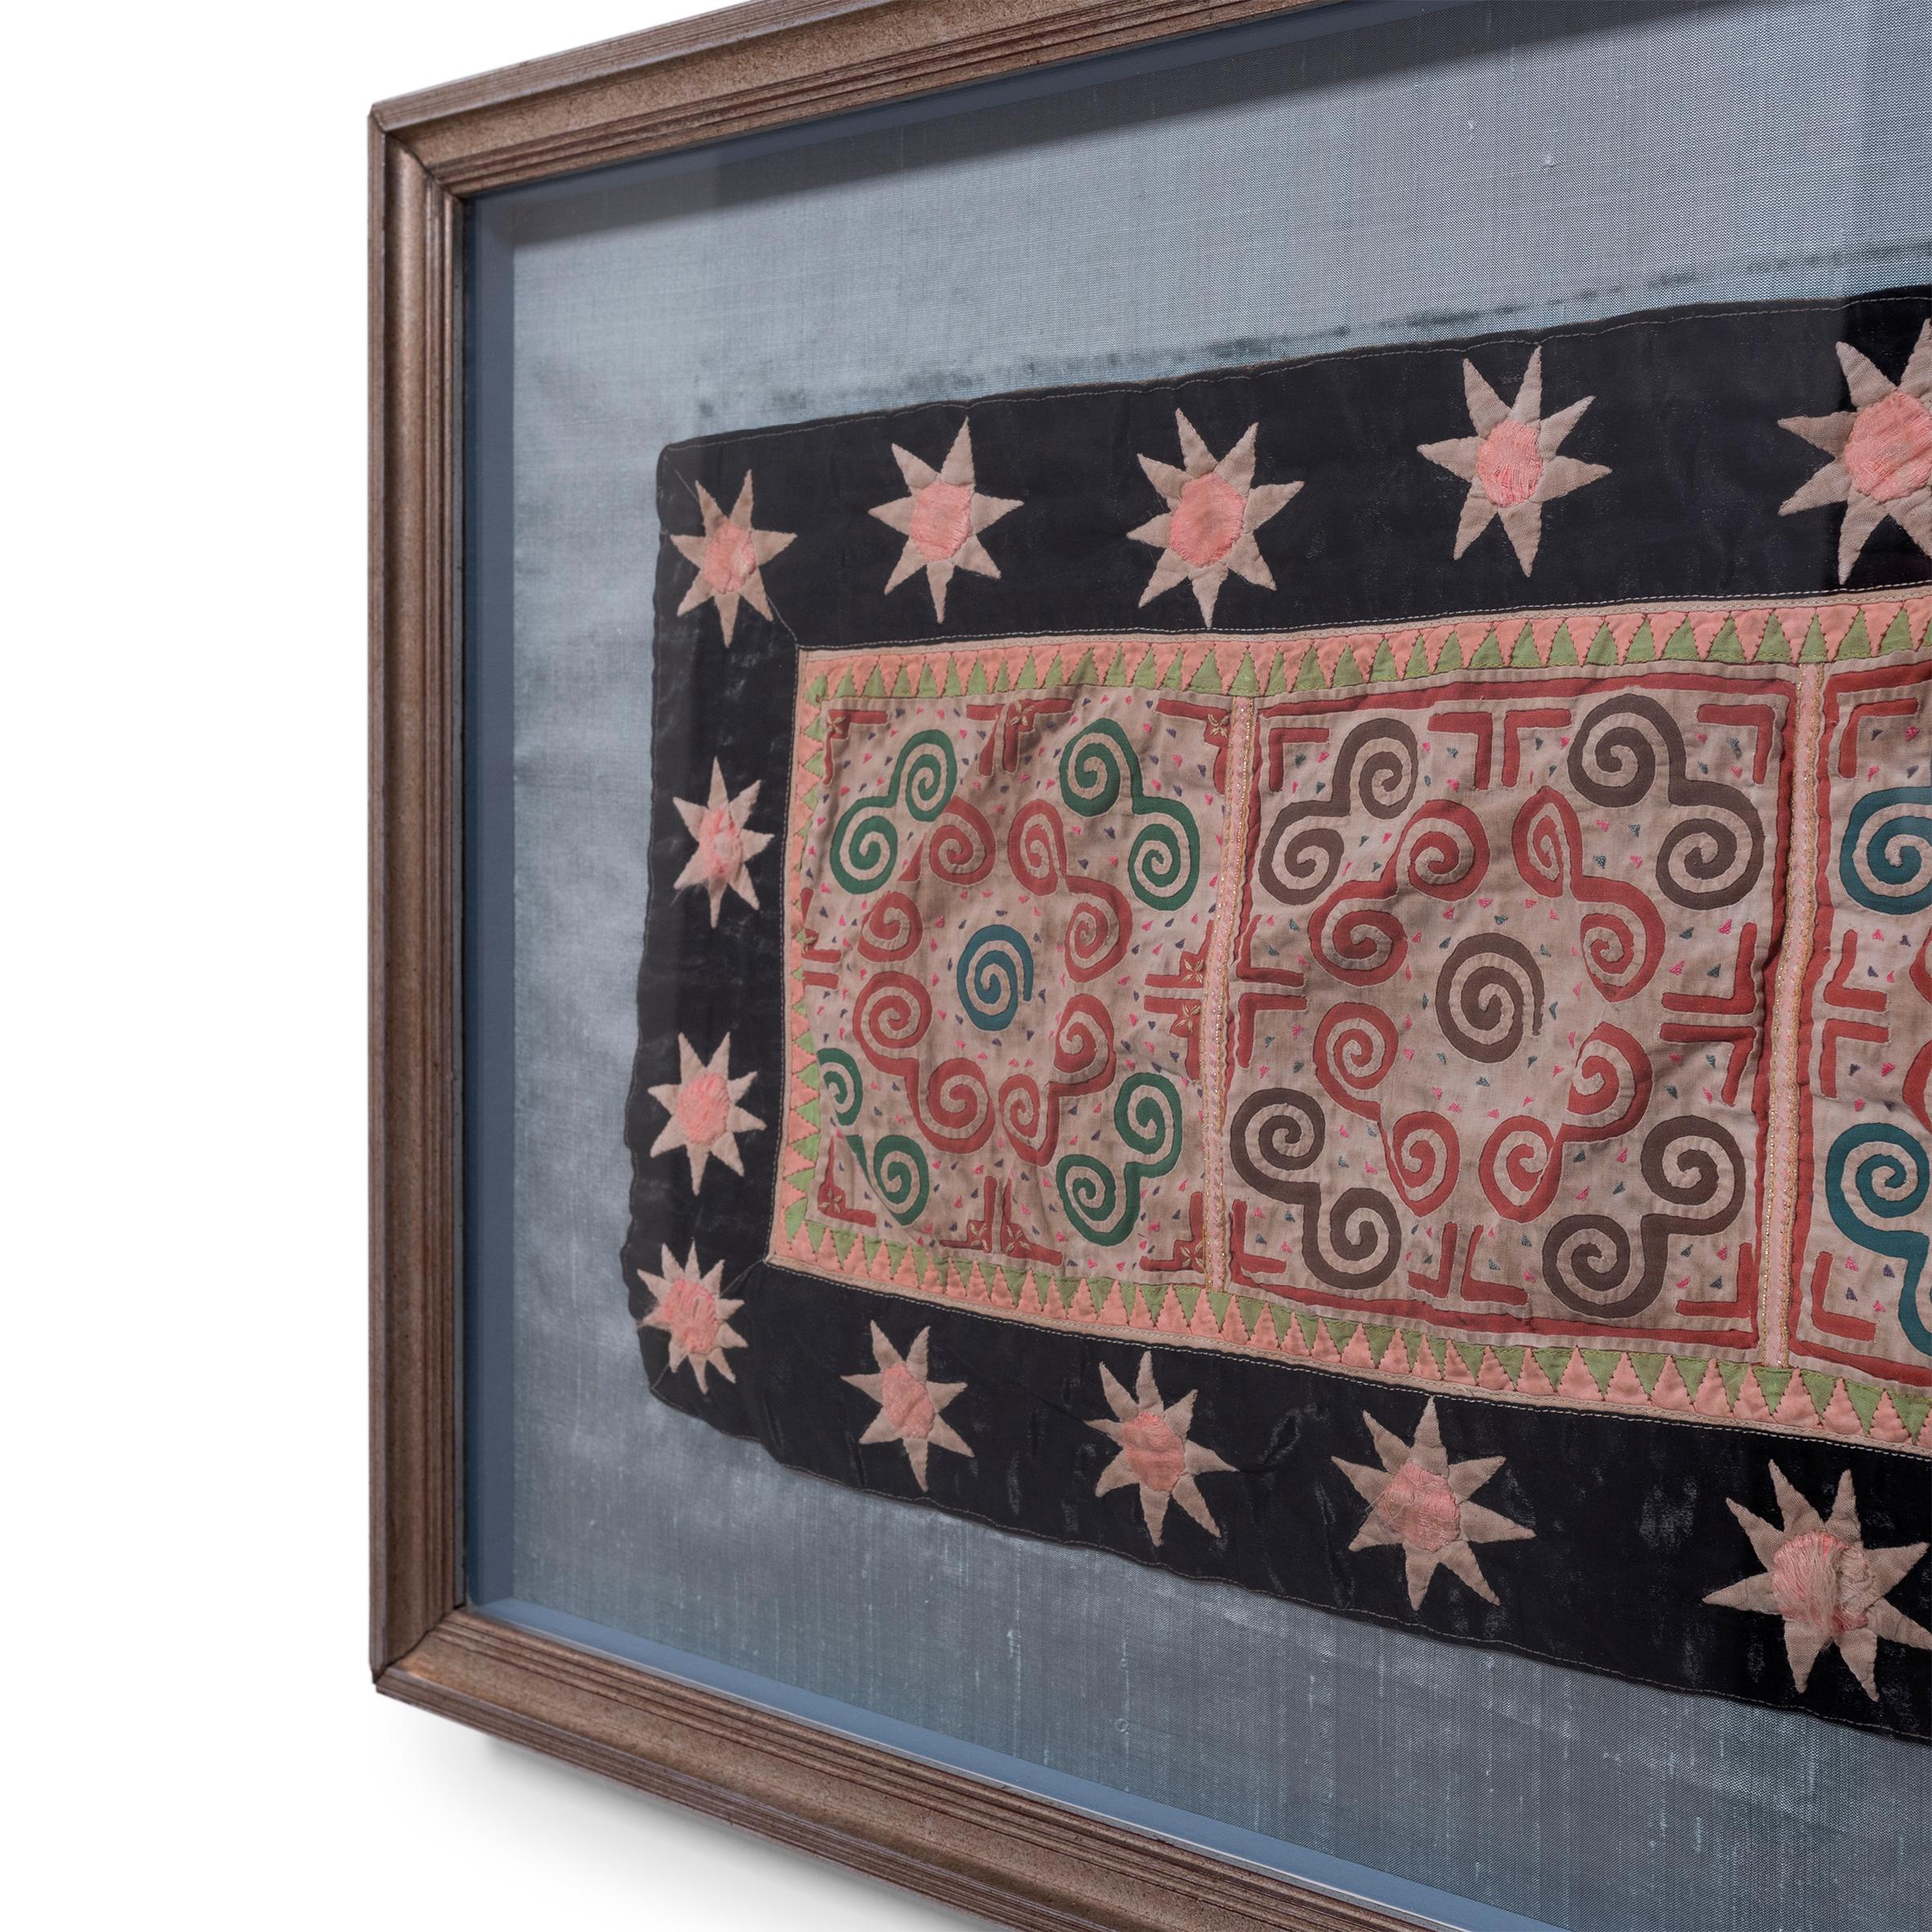 Dating to the mid-20th century, this colorful Hmong textile is a classic example of the appliqué technique used for the traditional cloth known as paj ntaub. Appliqué is the process by which patches of fabric are sewn onto a different piece of